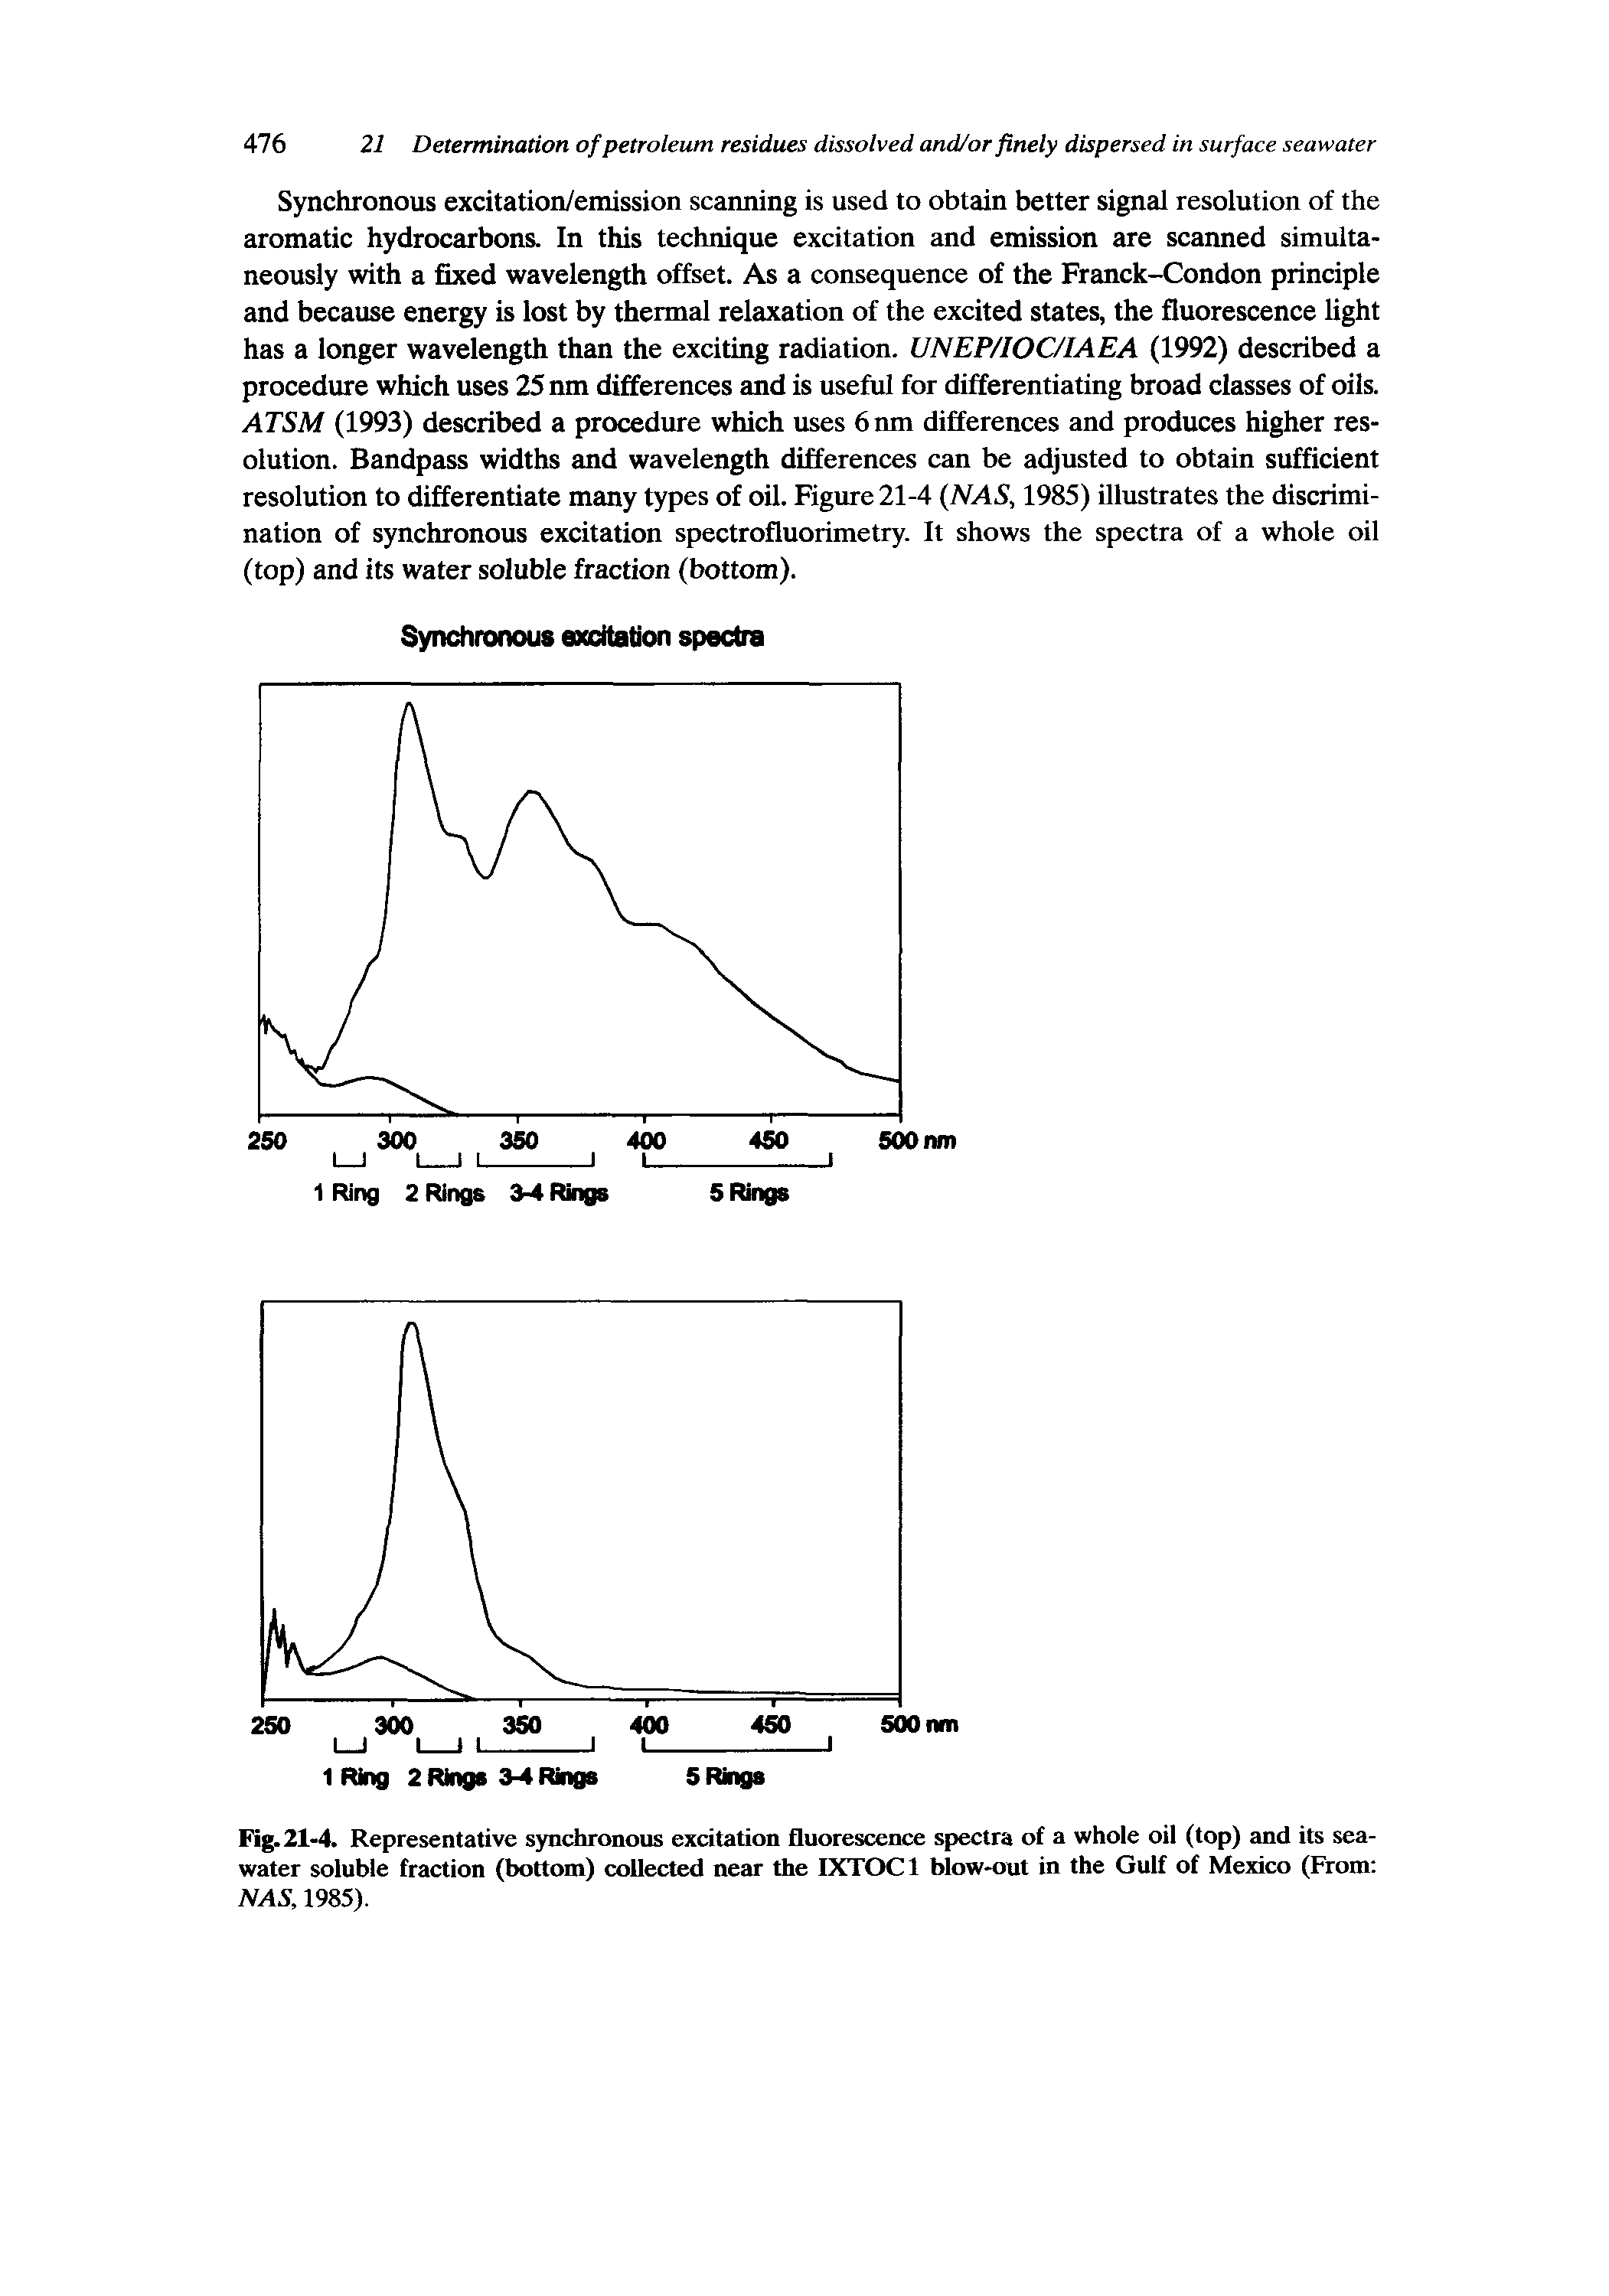 Fig. 21-4. Representative synchronous excitation fluorescence spectra of a whole oil (top) and its seawater soluble fraction (bottom) collected near the IXTOCl blow-out in the Gulf of Mexico (From NAS, 1985).